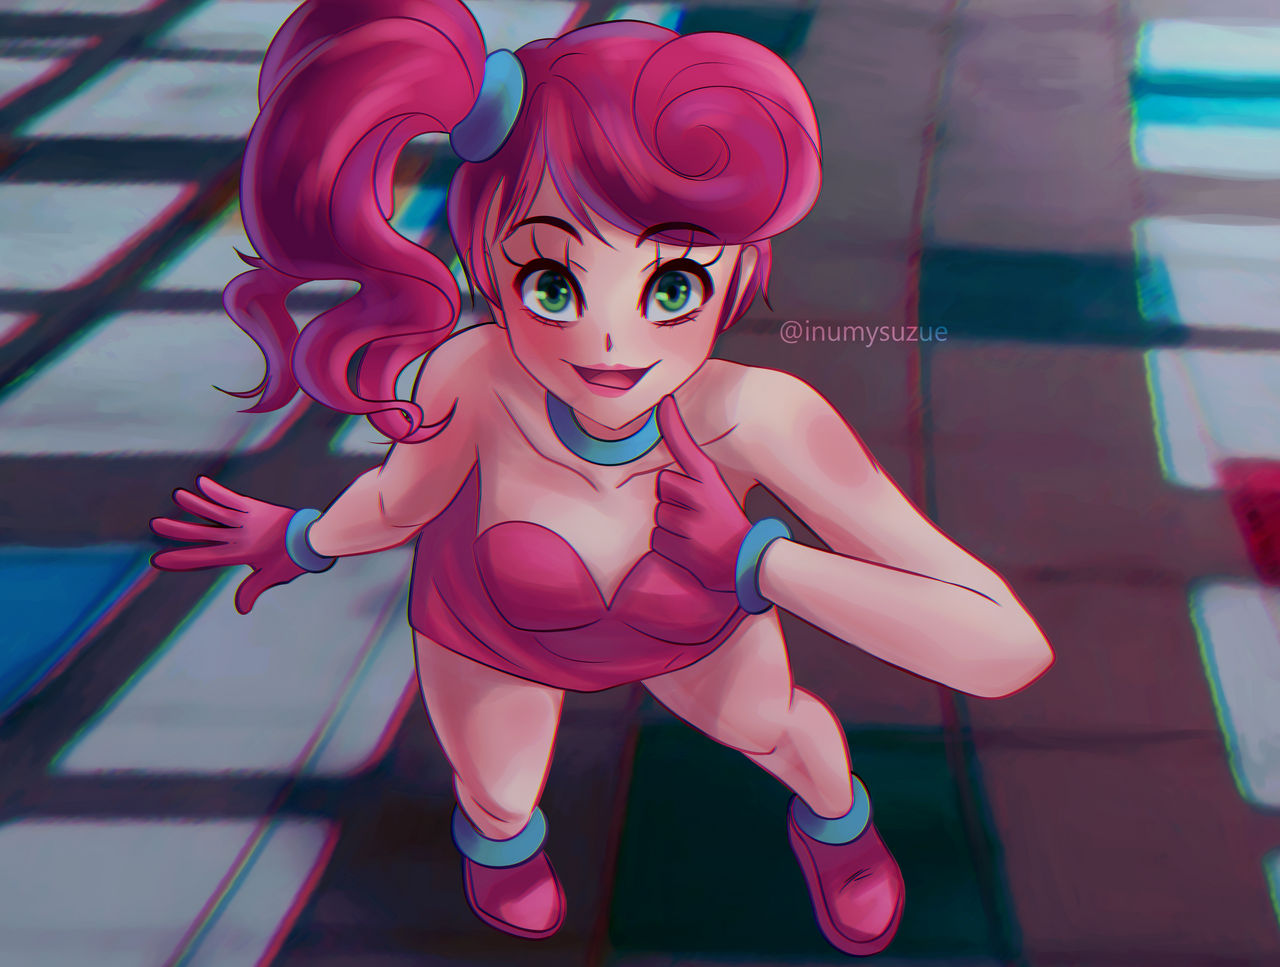 Fan made poppy playtime, chapter 2 ending by ey858 on DeviantArt